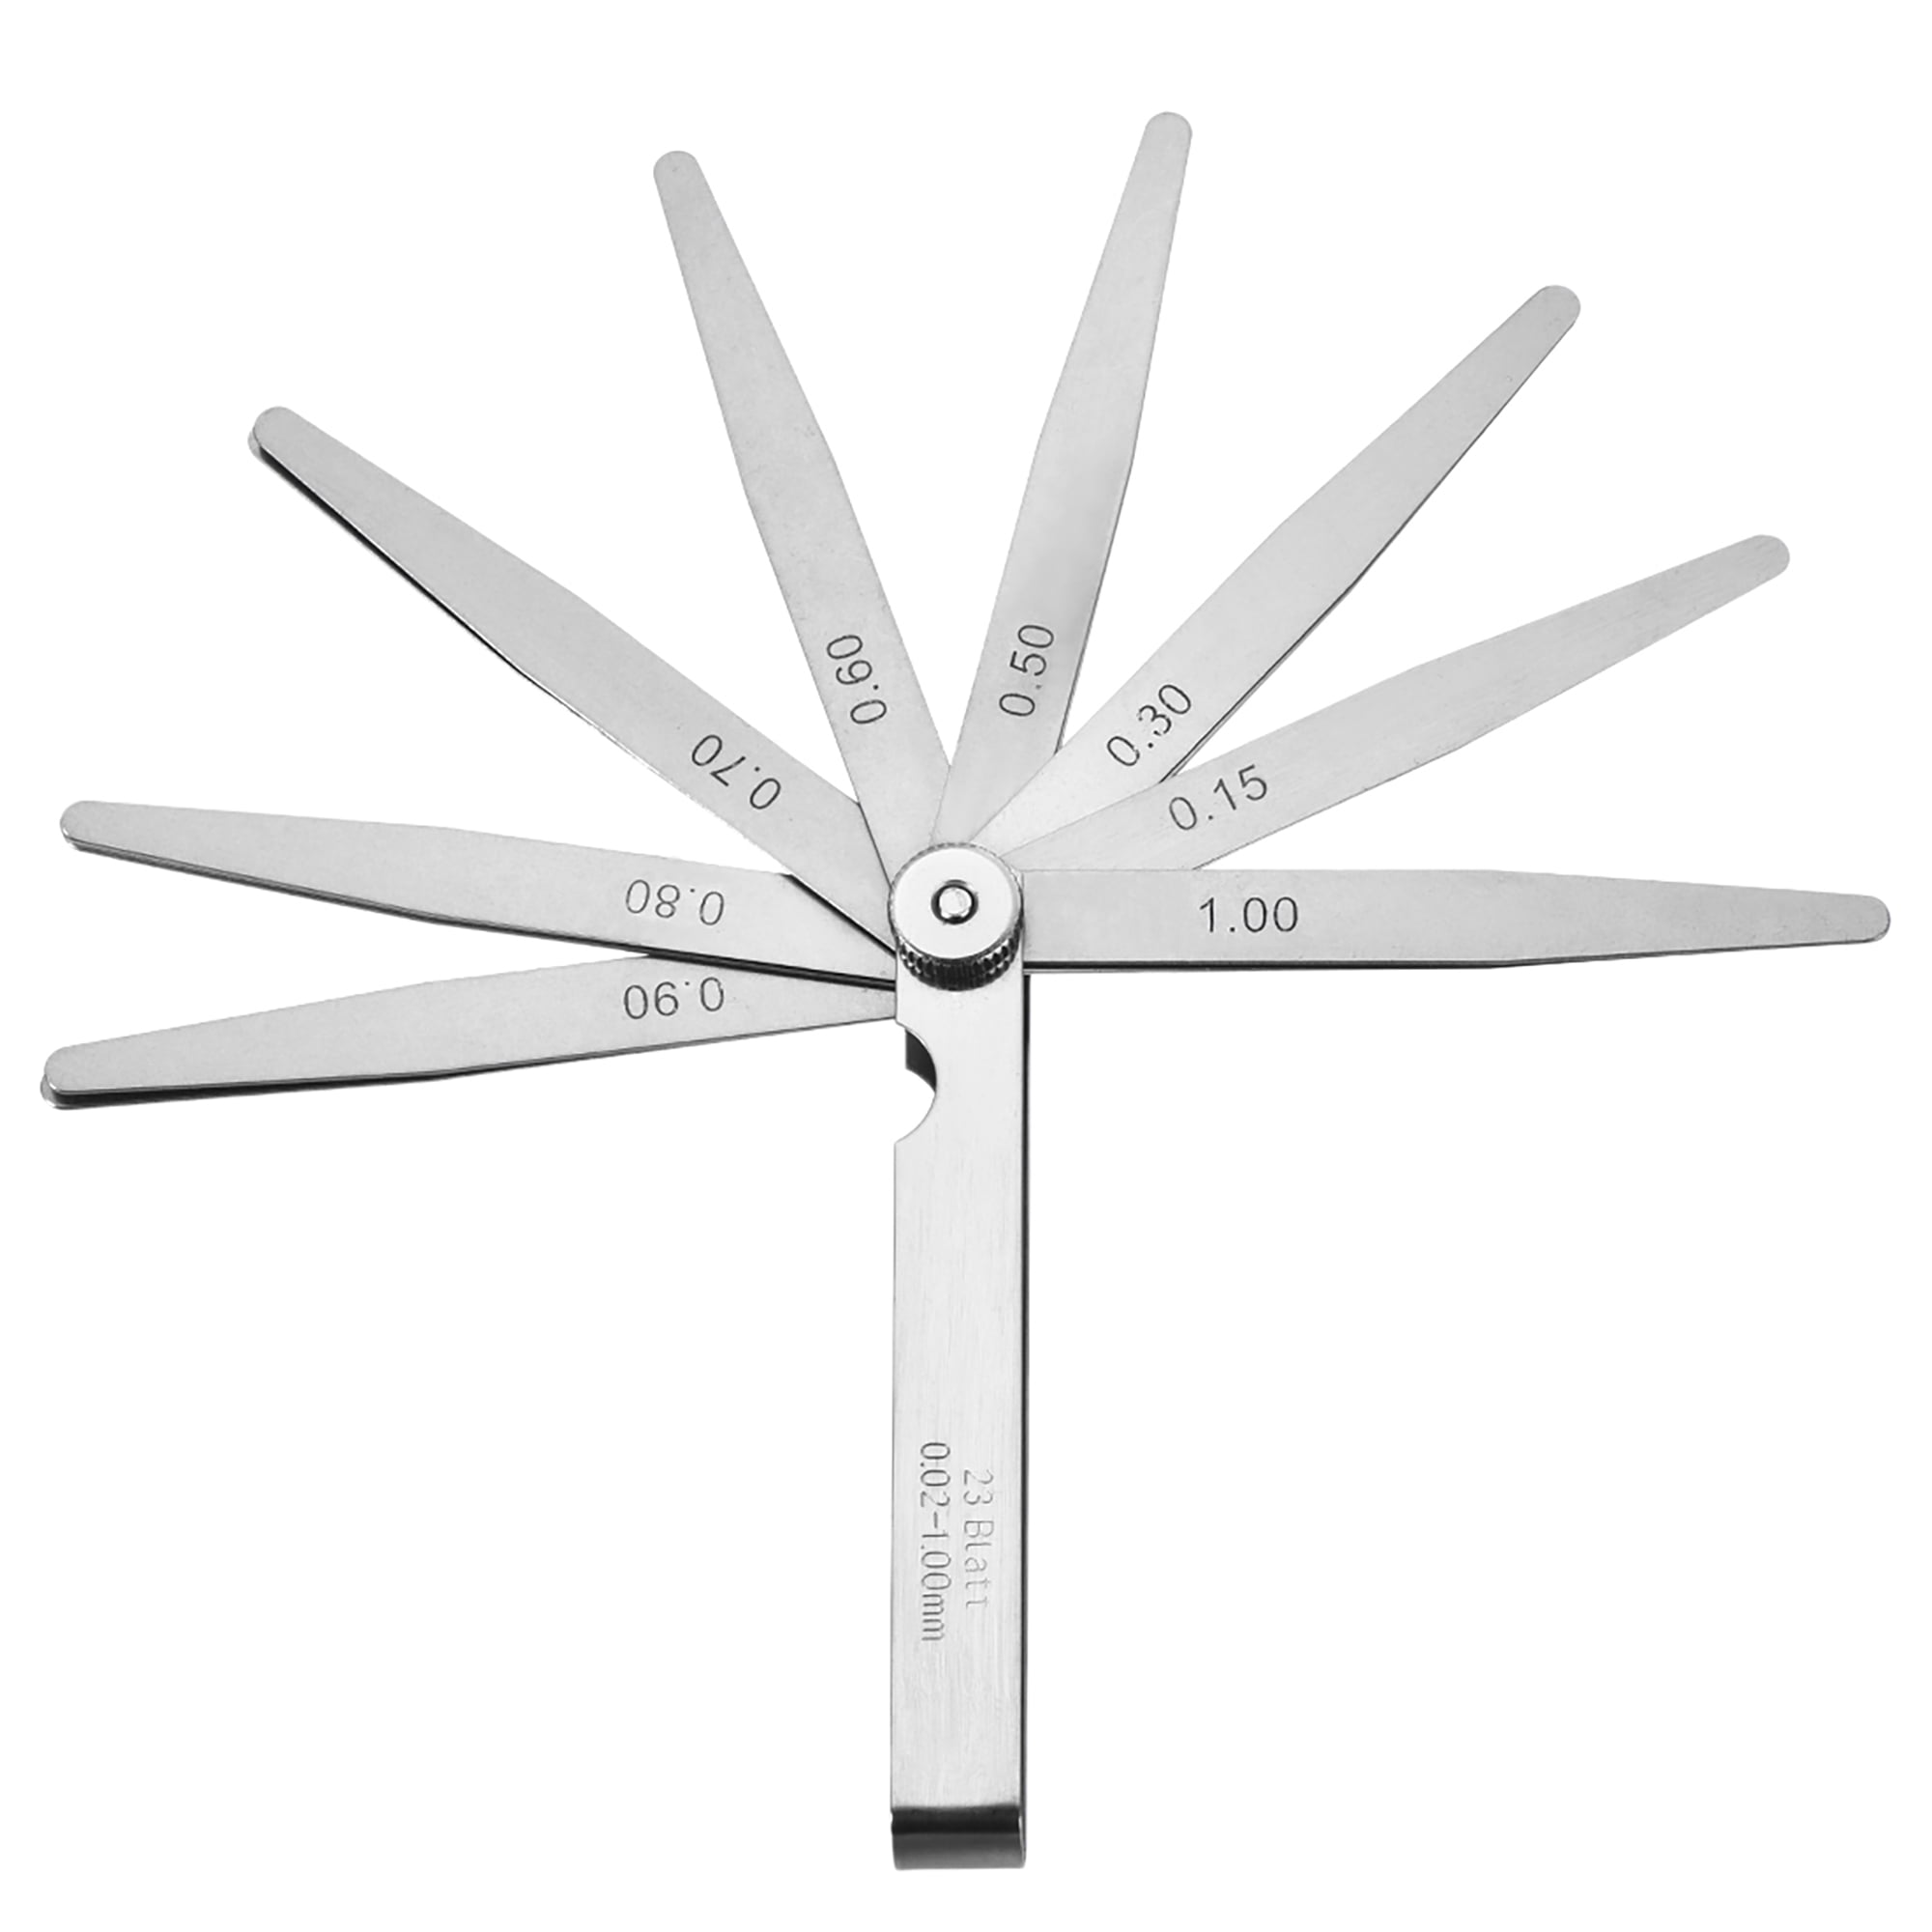 23 Blades 0.02-1.00 mm Details about   Feeler Gage Dual Marked Metric Gap Measuring Tool